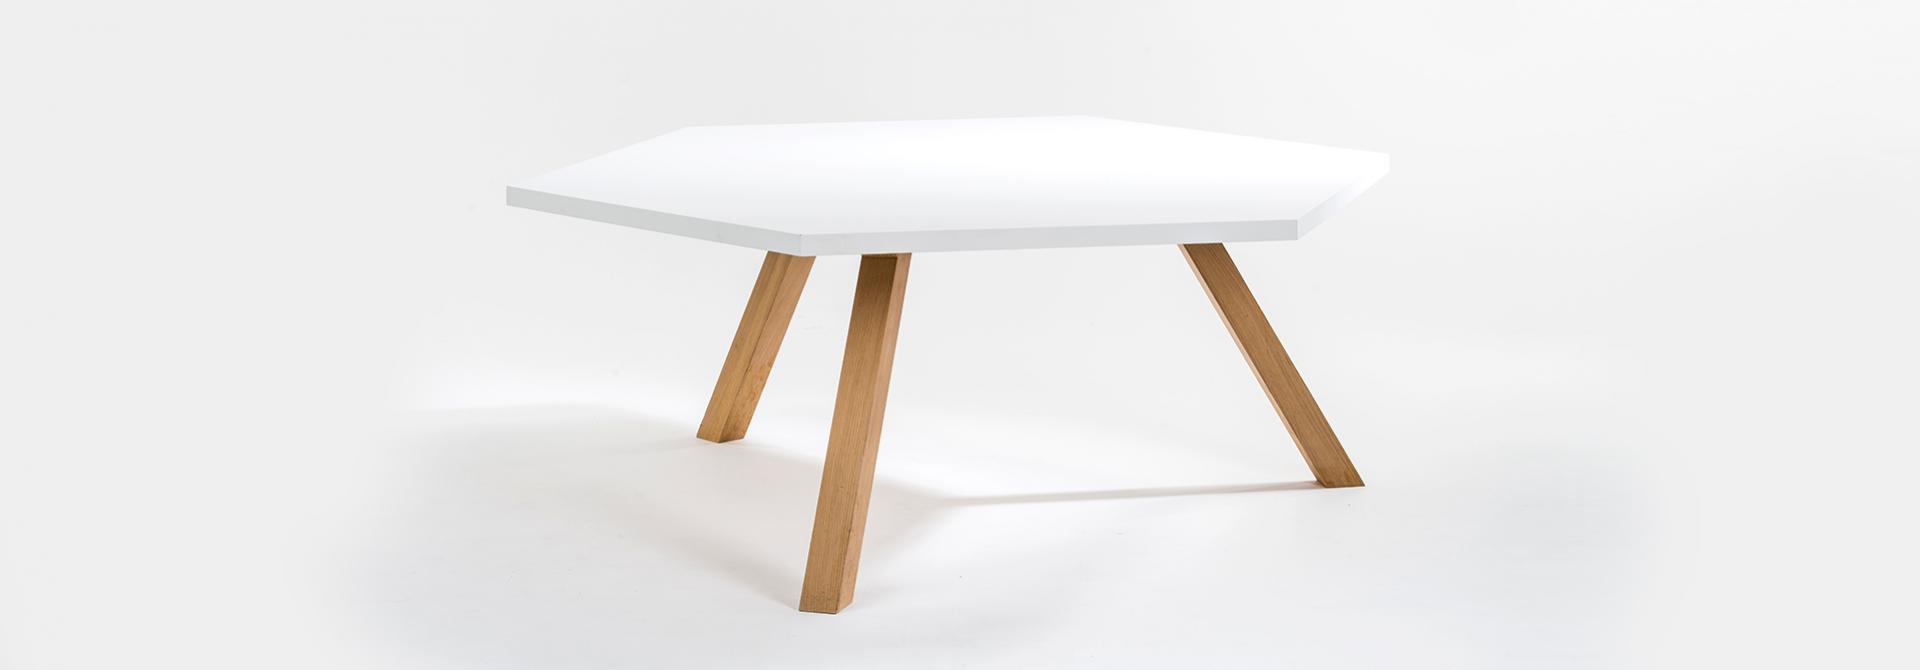 table hex white with wood table legs front view